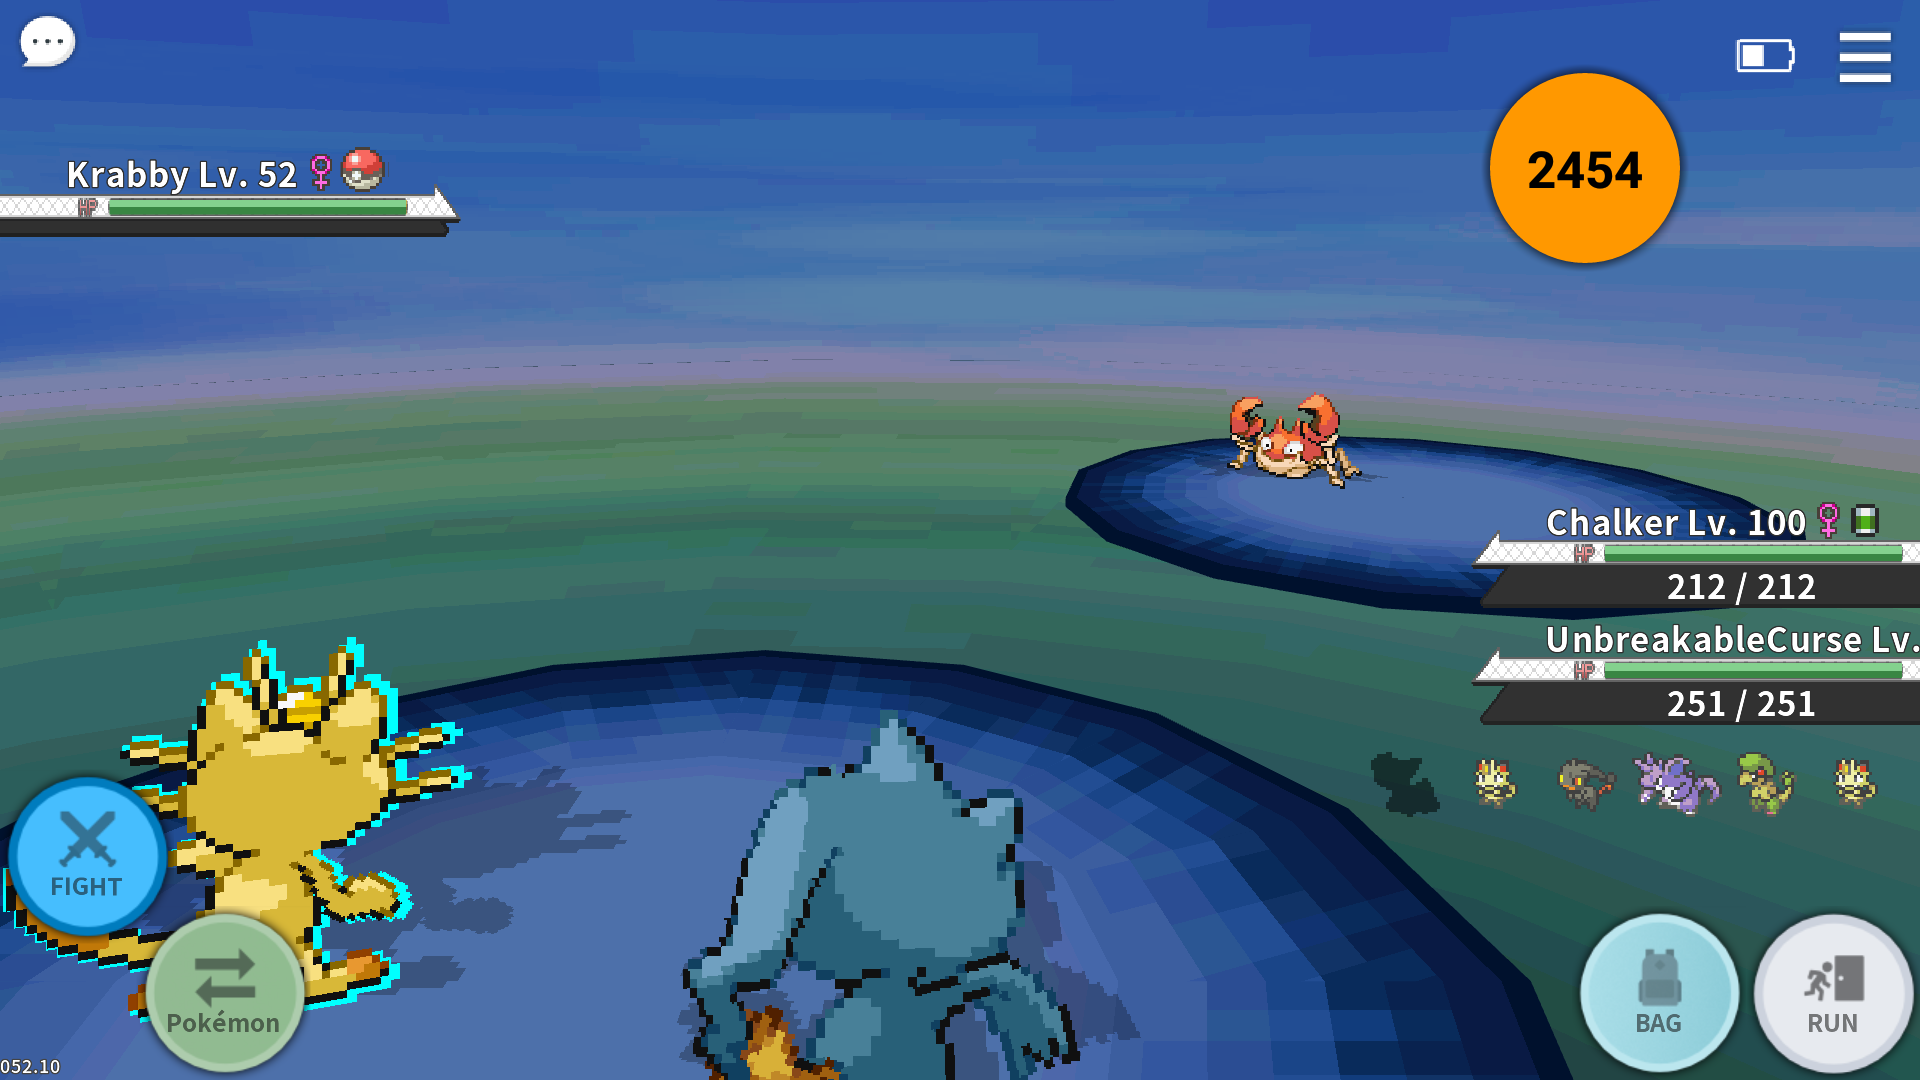 3 encountered mons at the same time while fishing - General Discussion -  PokeMMO